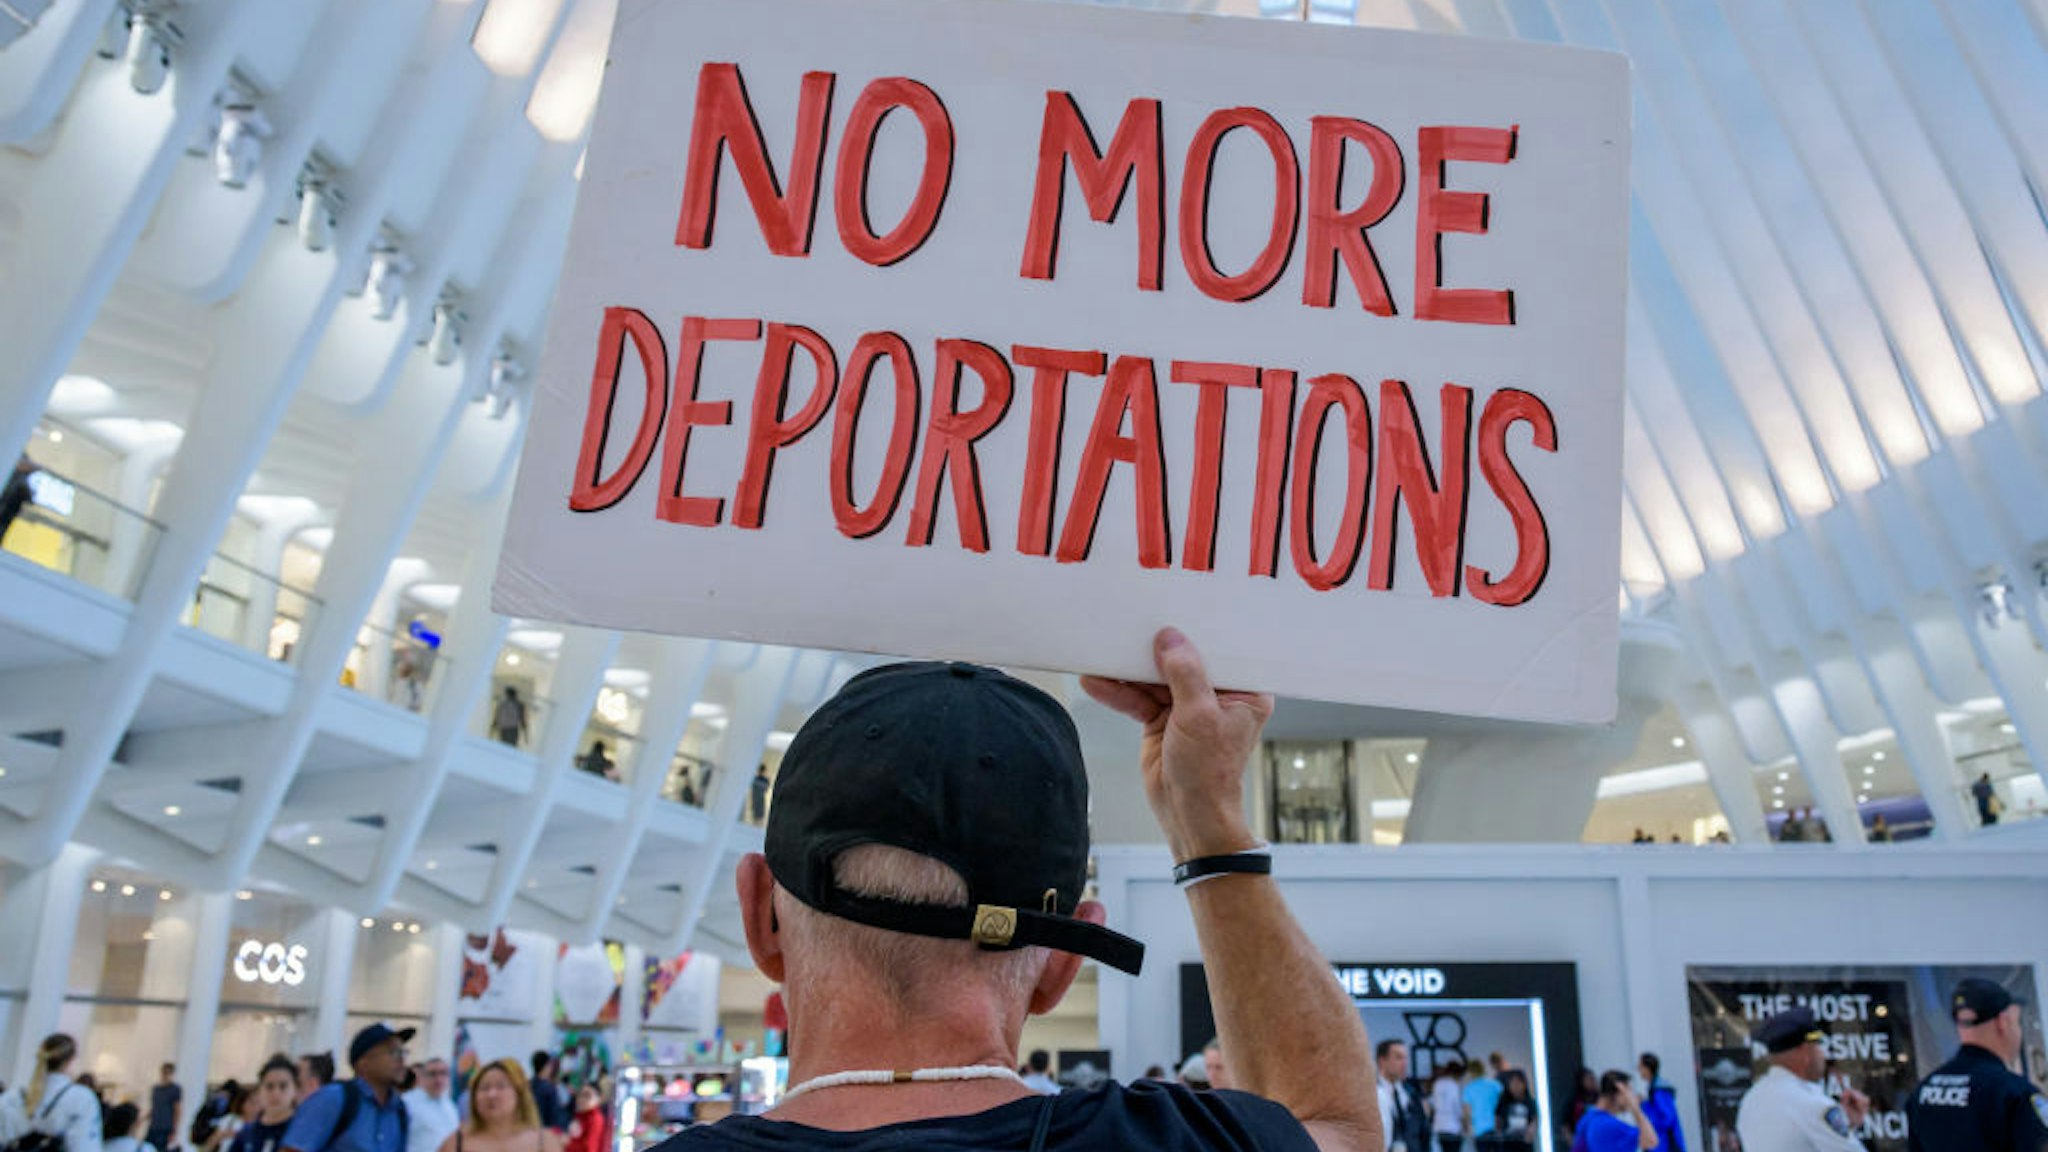 2019/09/12: Members of the activist group Rise And Resist gathered at a silent protest inside The Oculus on September 12, 2019 holding NO RAIDS/CLOSE THE CAMPS/ABOLISH ICE banners, photographs of the children who have died in ICE custody, and photographs of the detention camps to object to Border Patrol and ICE treatment of immigrants, refugees, and asylum seekers.